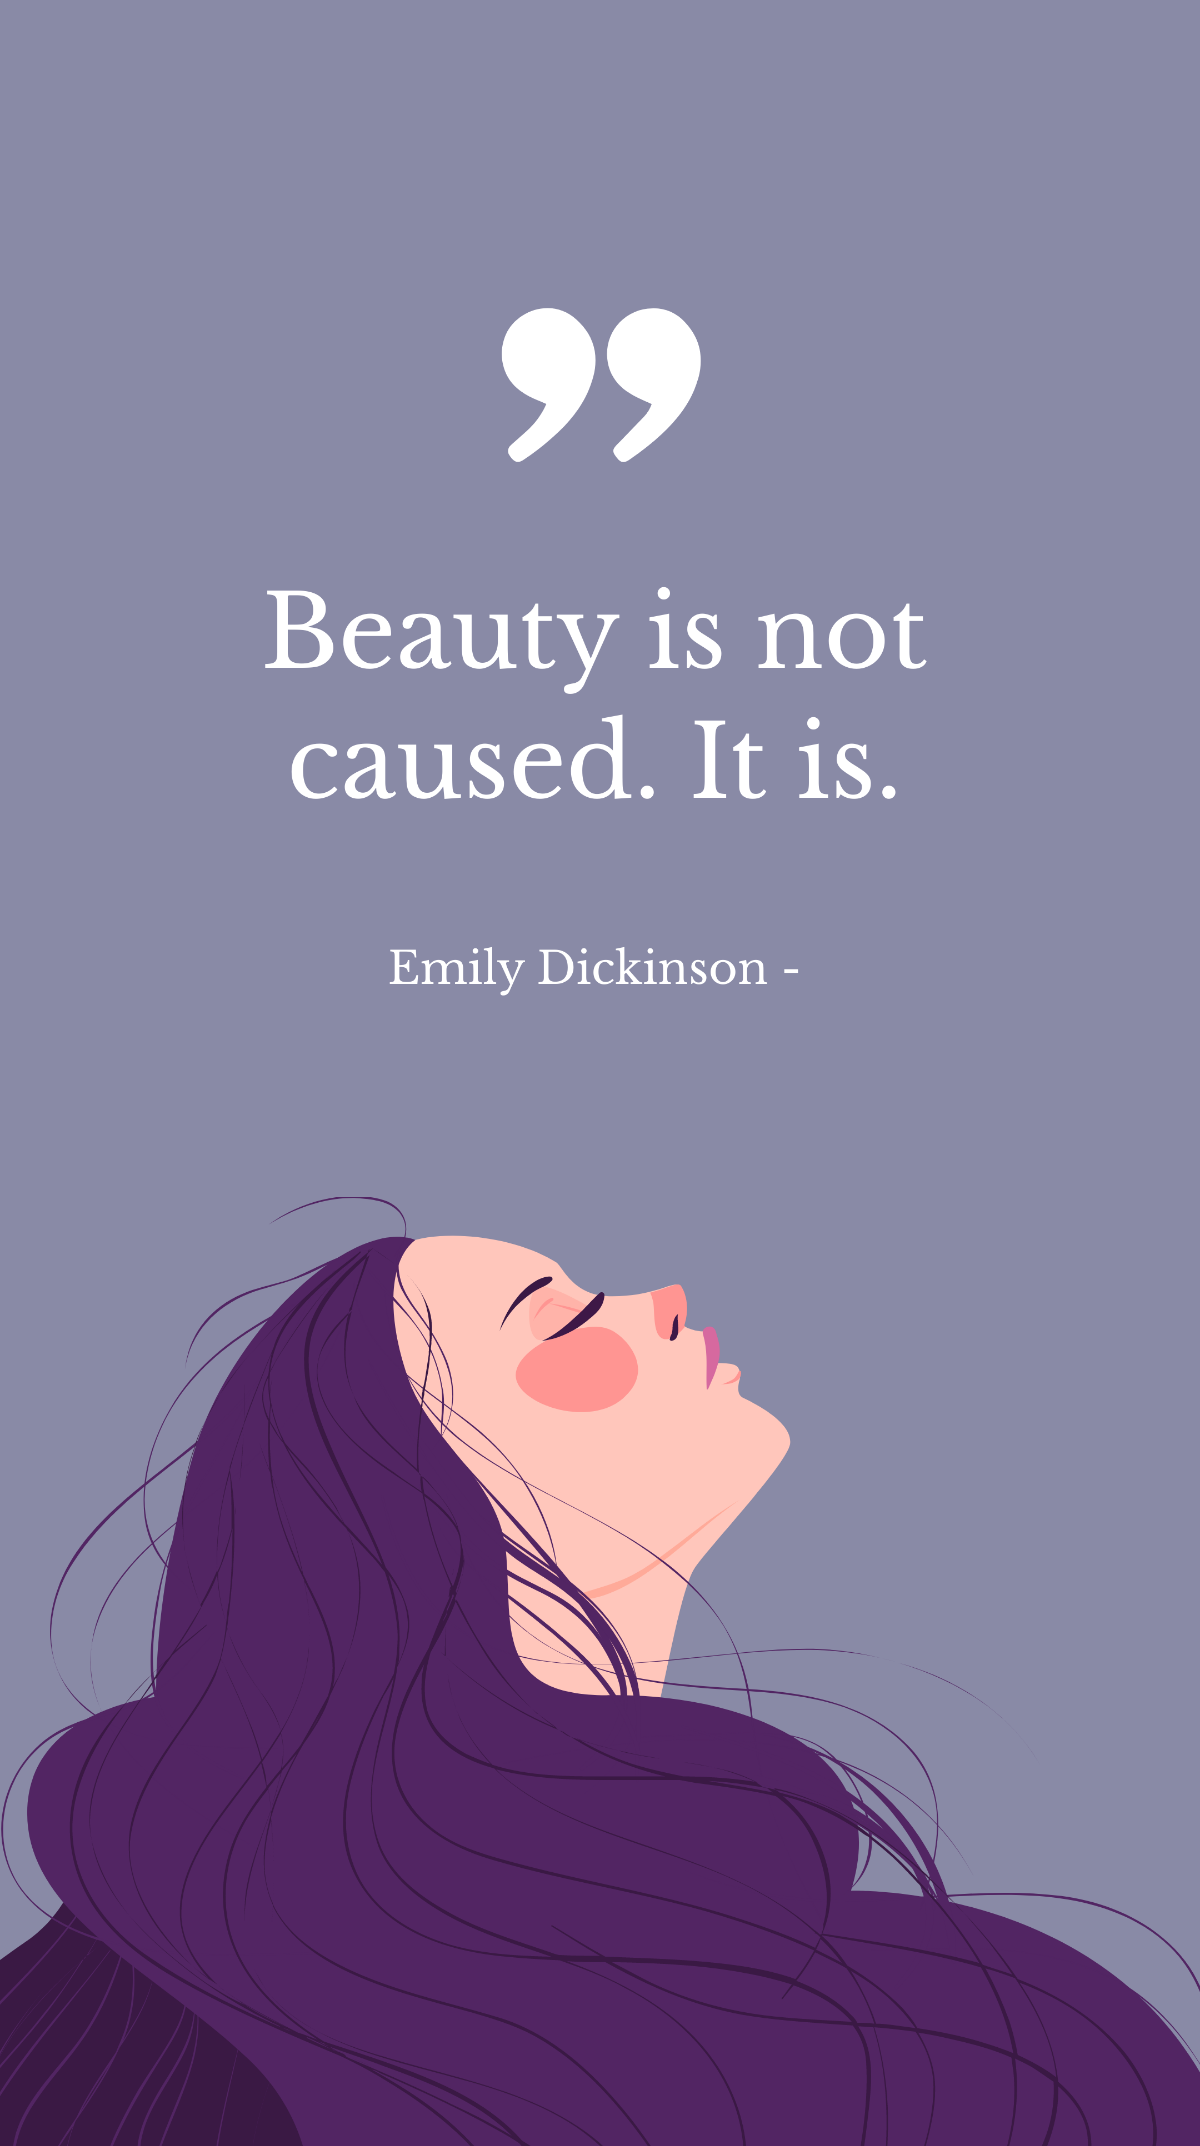 Emily Dickinson - Beauty is not caused. It is.